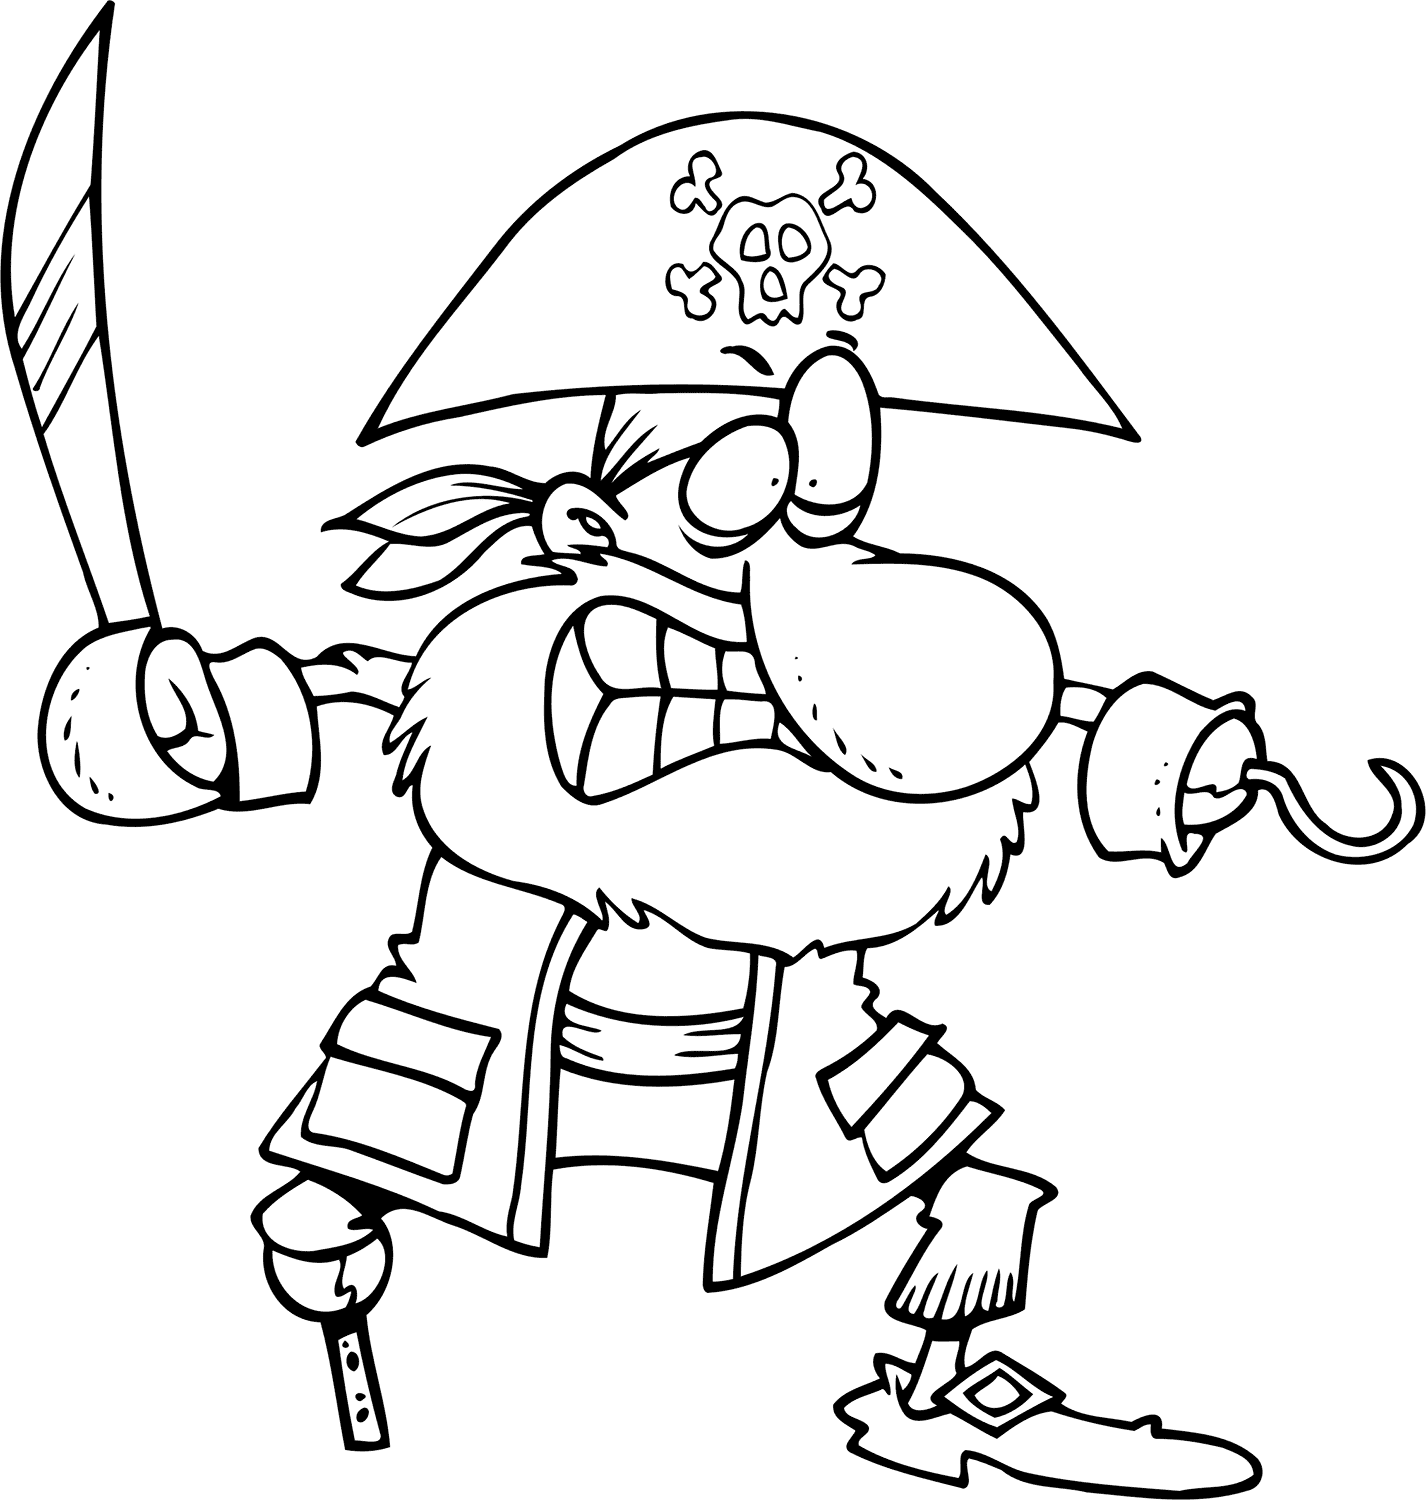 Funny Cartoon Pirate Coloring Pages